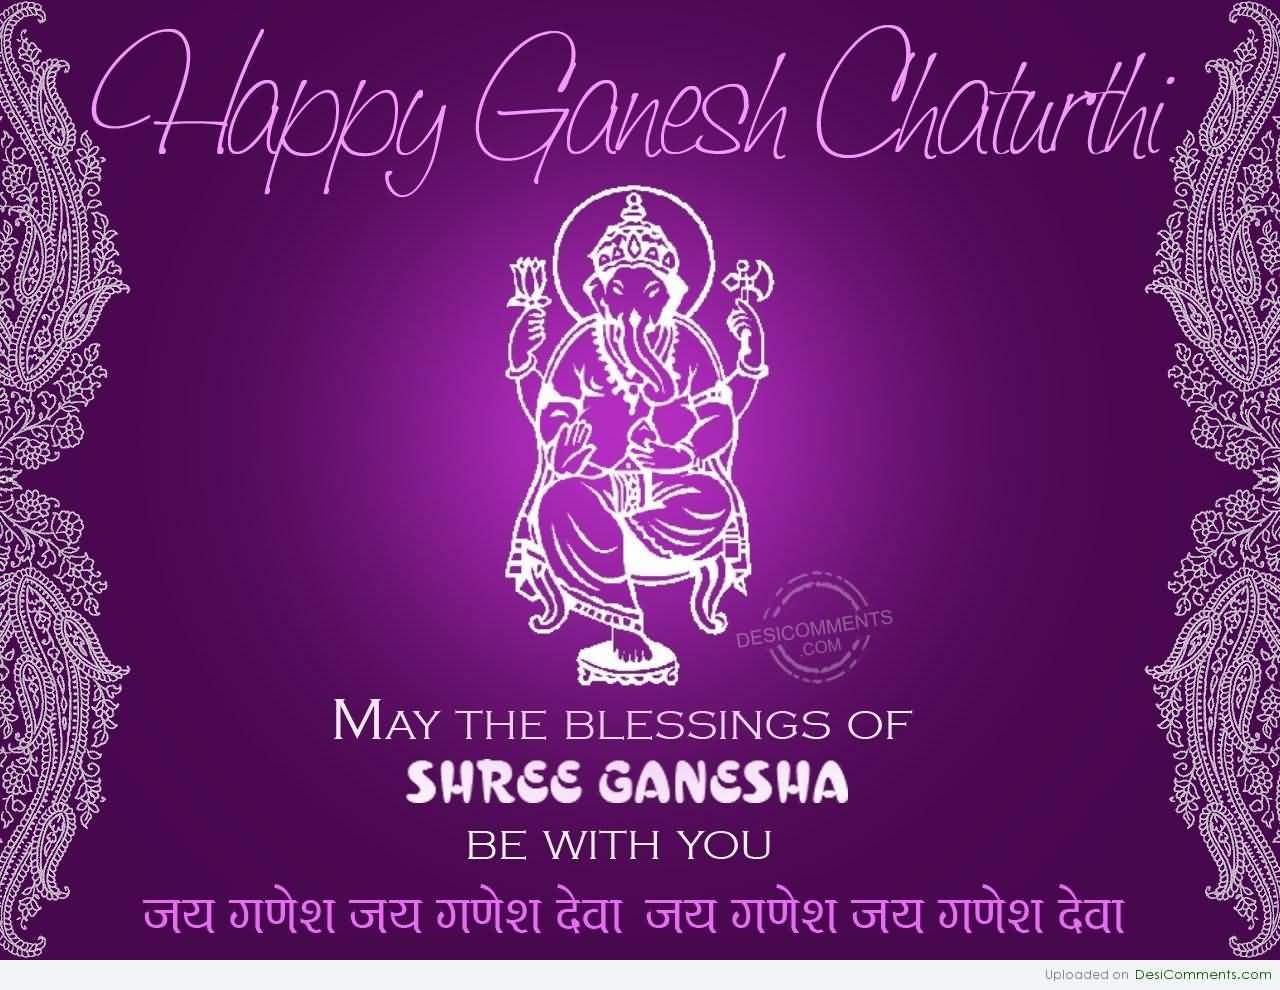 Happy Ganesh Chaturthi 2016 May The Blessings Of Shree Ganesha Be With You